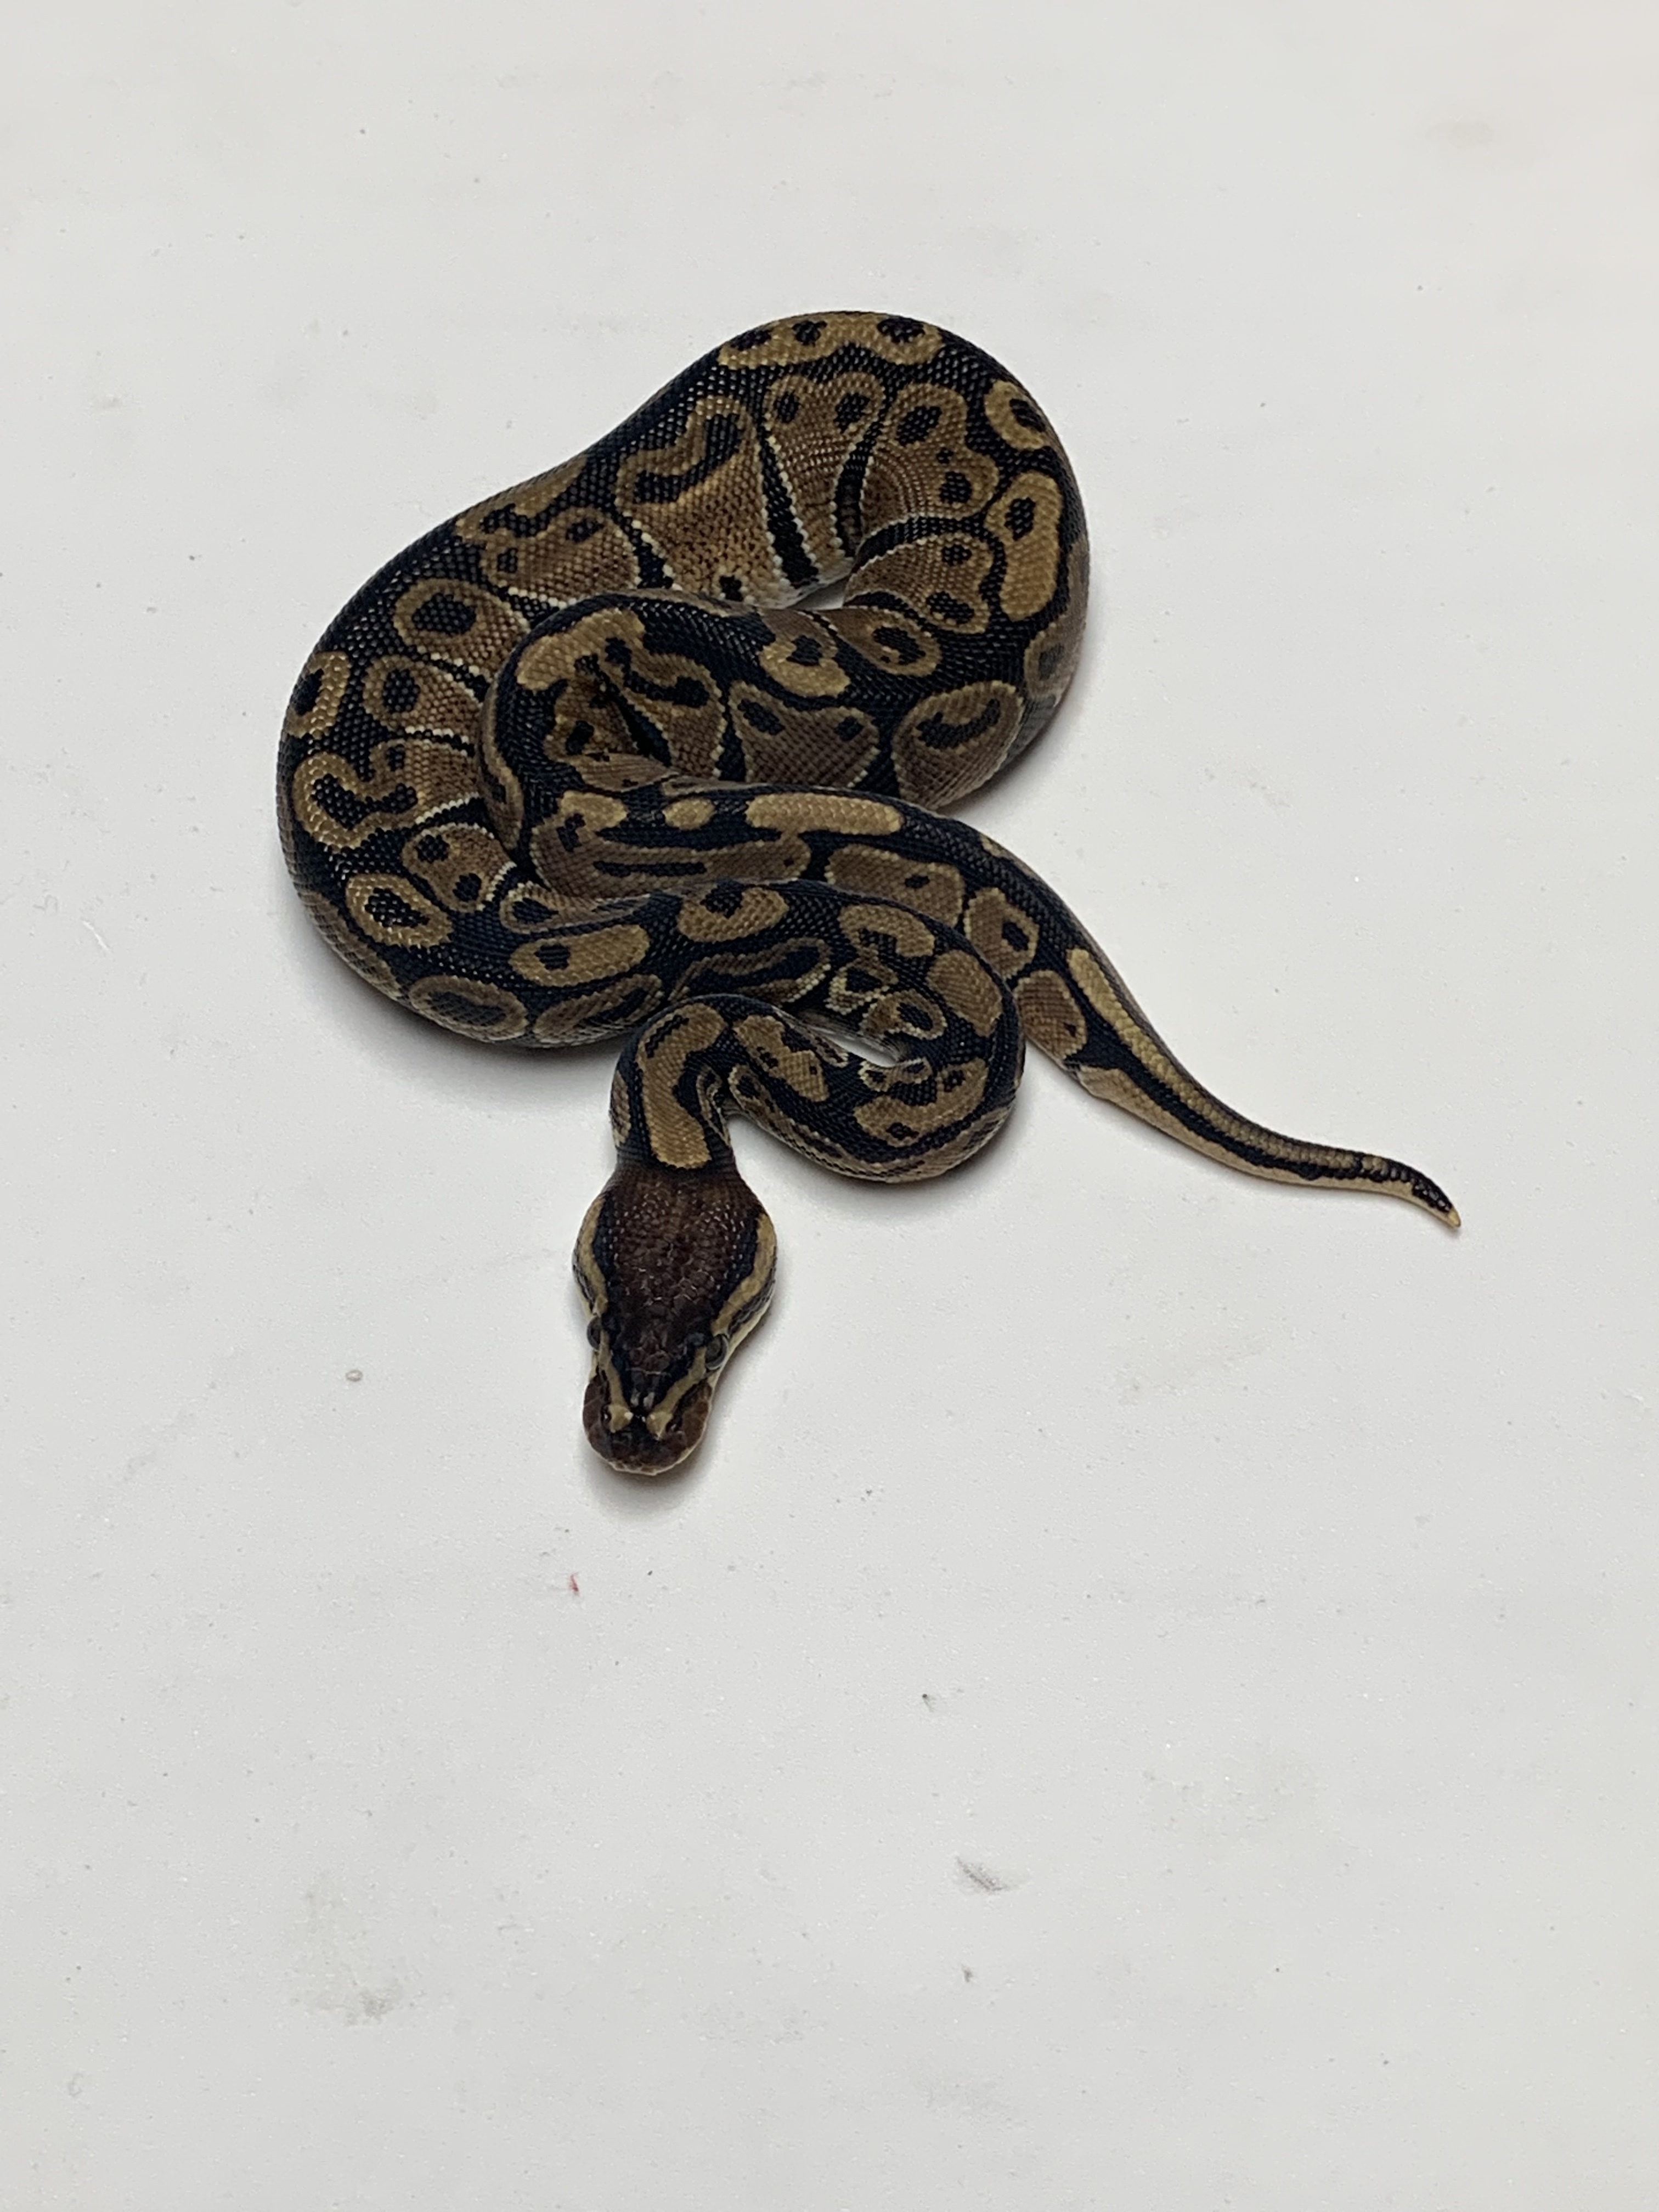 Trick Ball Python by Danner Constrictors